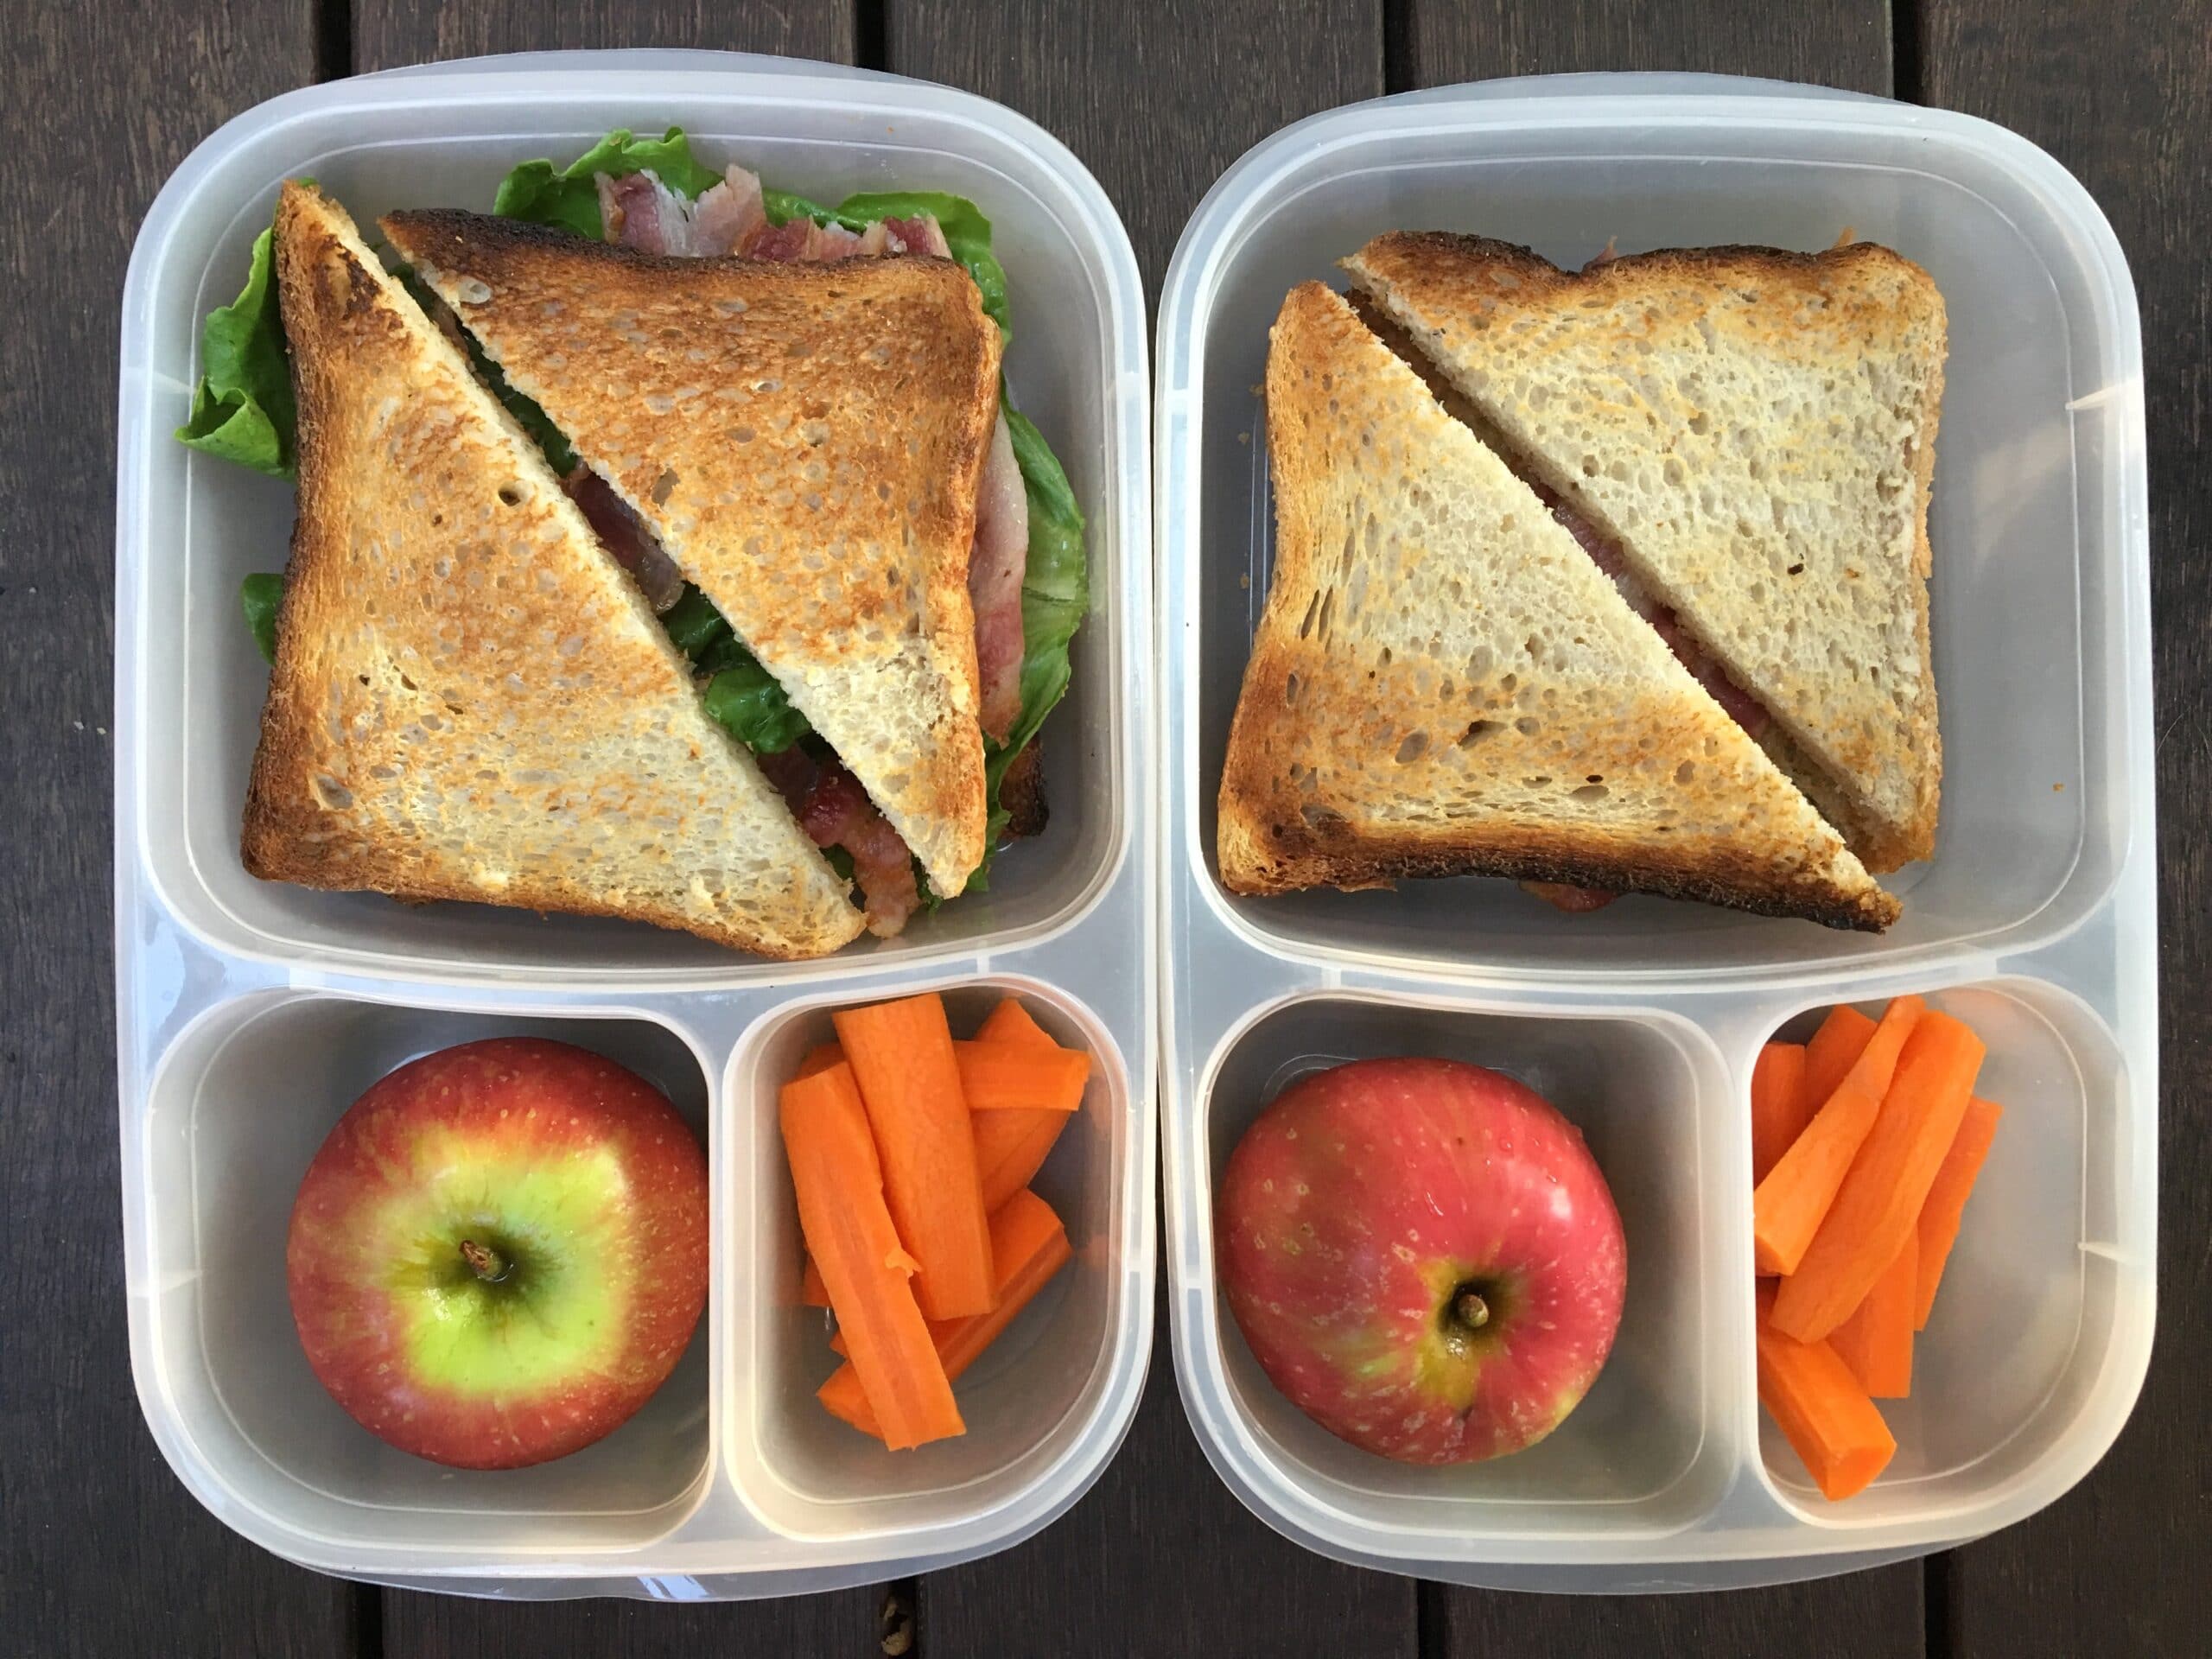 5 simple ways to up the lunchbox appeal from halsanutrition.com #school #lunchboxes #healthykids